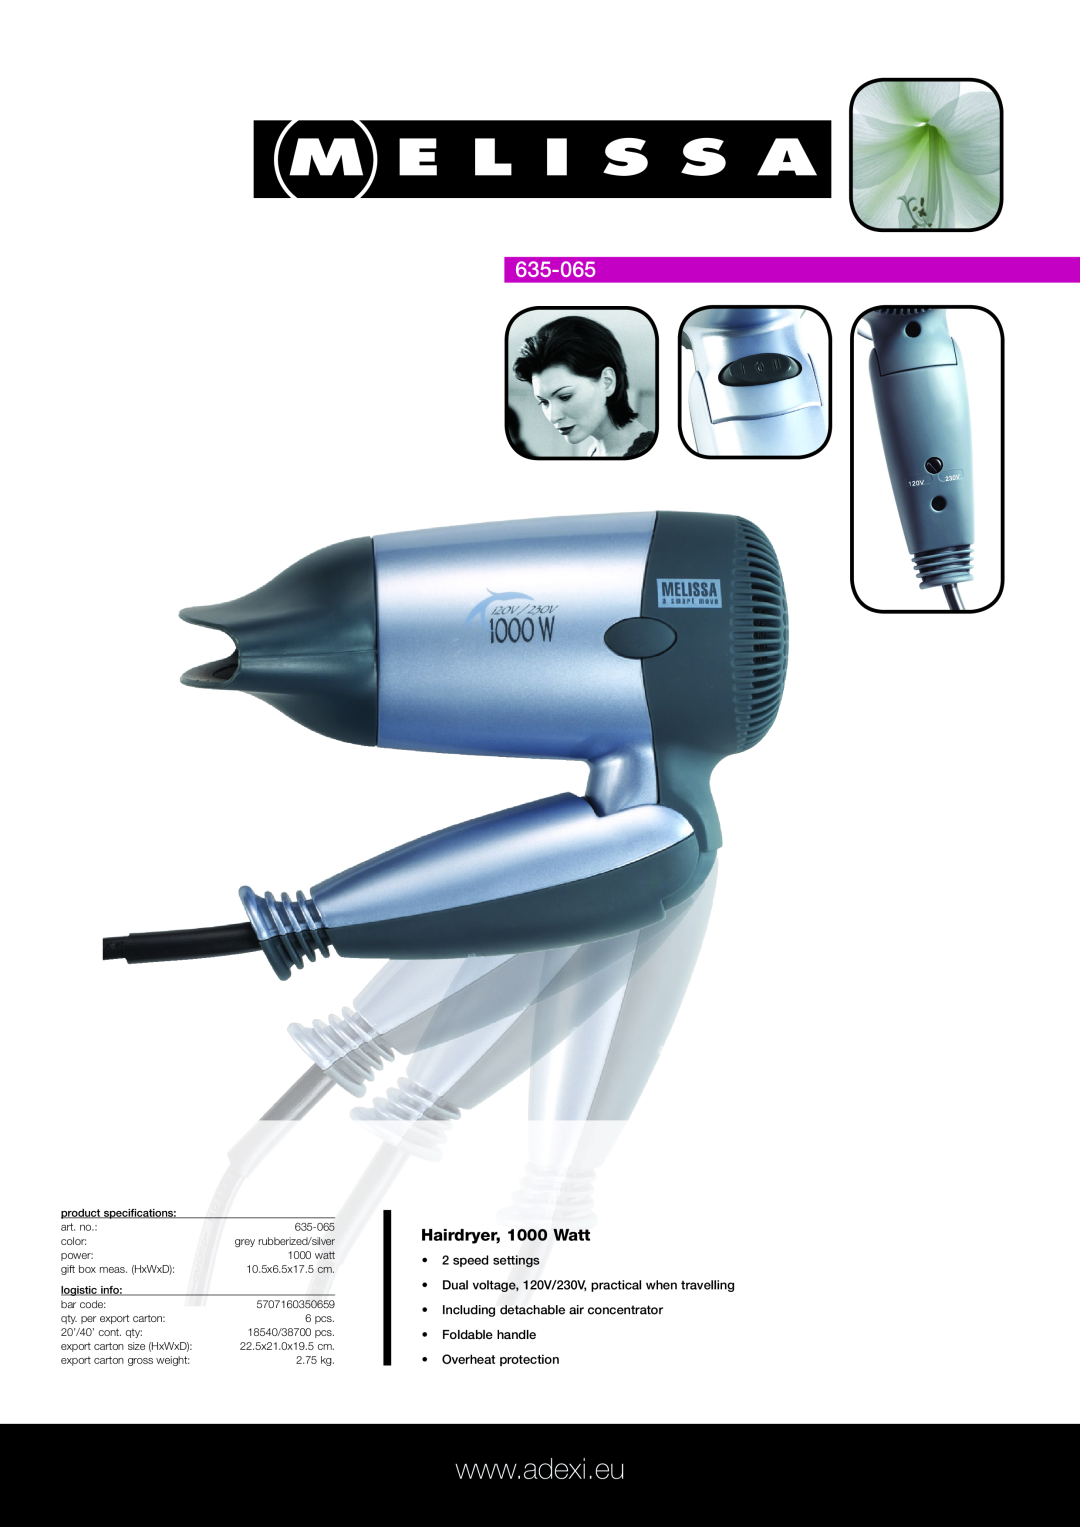 Melissa 635-065 specifications Hairdryer, 1000 Watt, speed settings, Dual voltage, 120V/230V, practical when travelling 